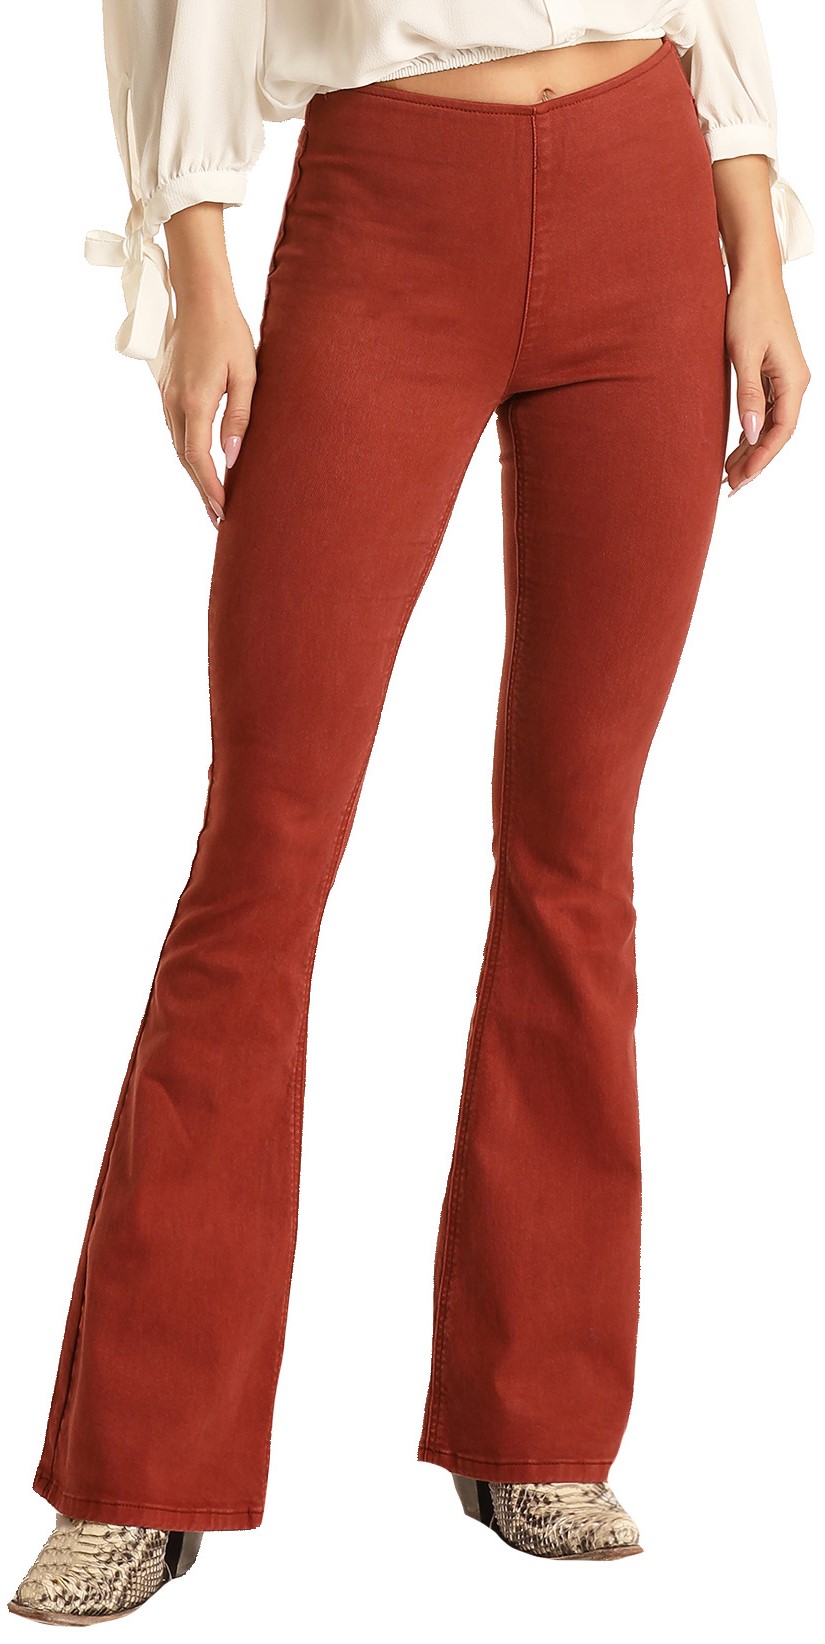 Women's Bargain Bells High Rise Stretch Pull-On Flare Jeans #WPH8174